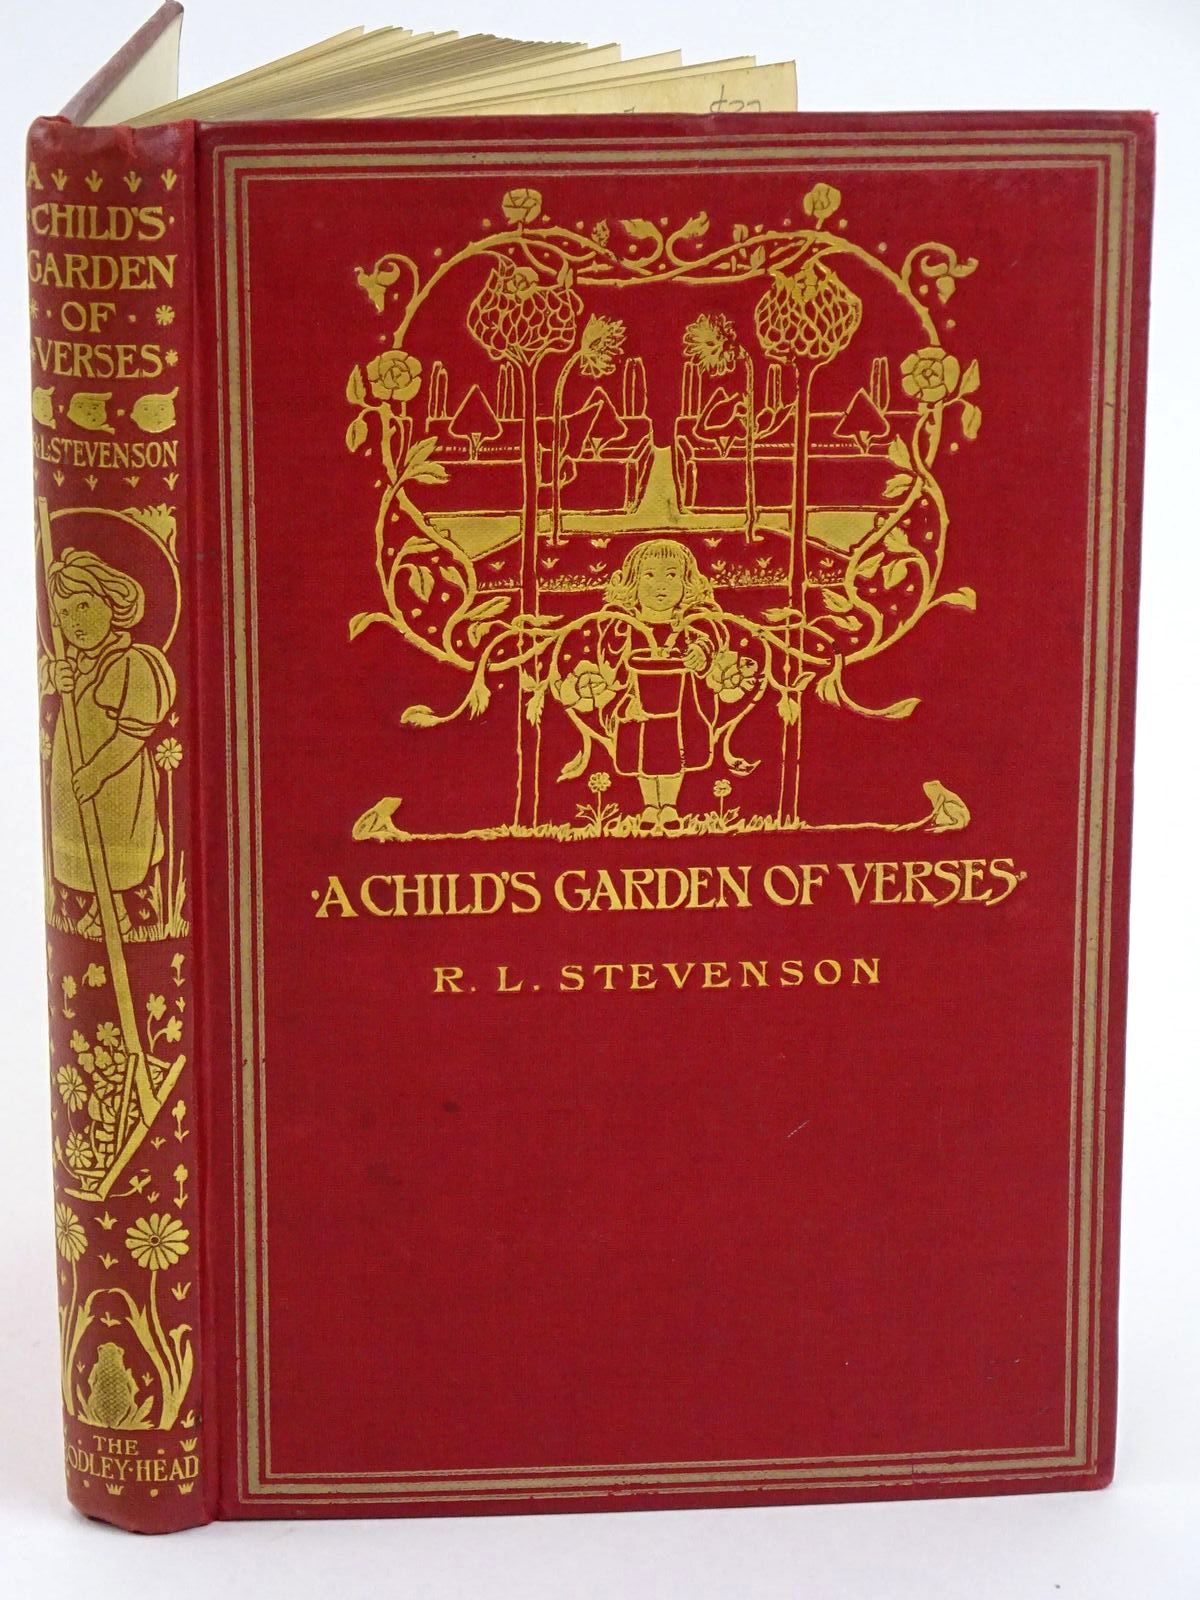 STEVENSON, ROBERT LOUIS ILLUSTRATED BY ROBINSON, CHARLES - A Child's Garden of Verses